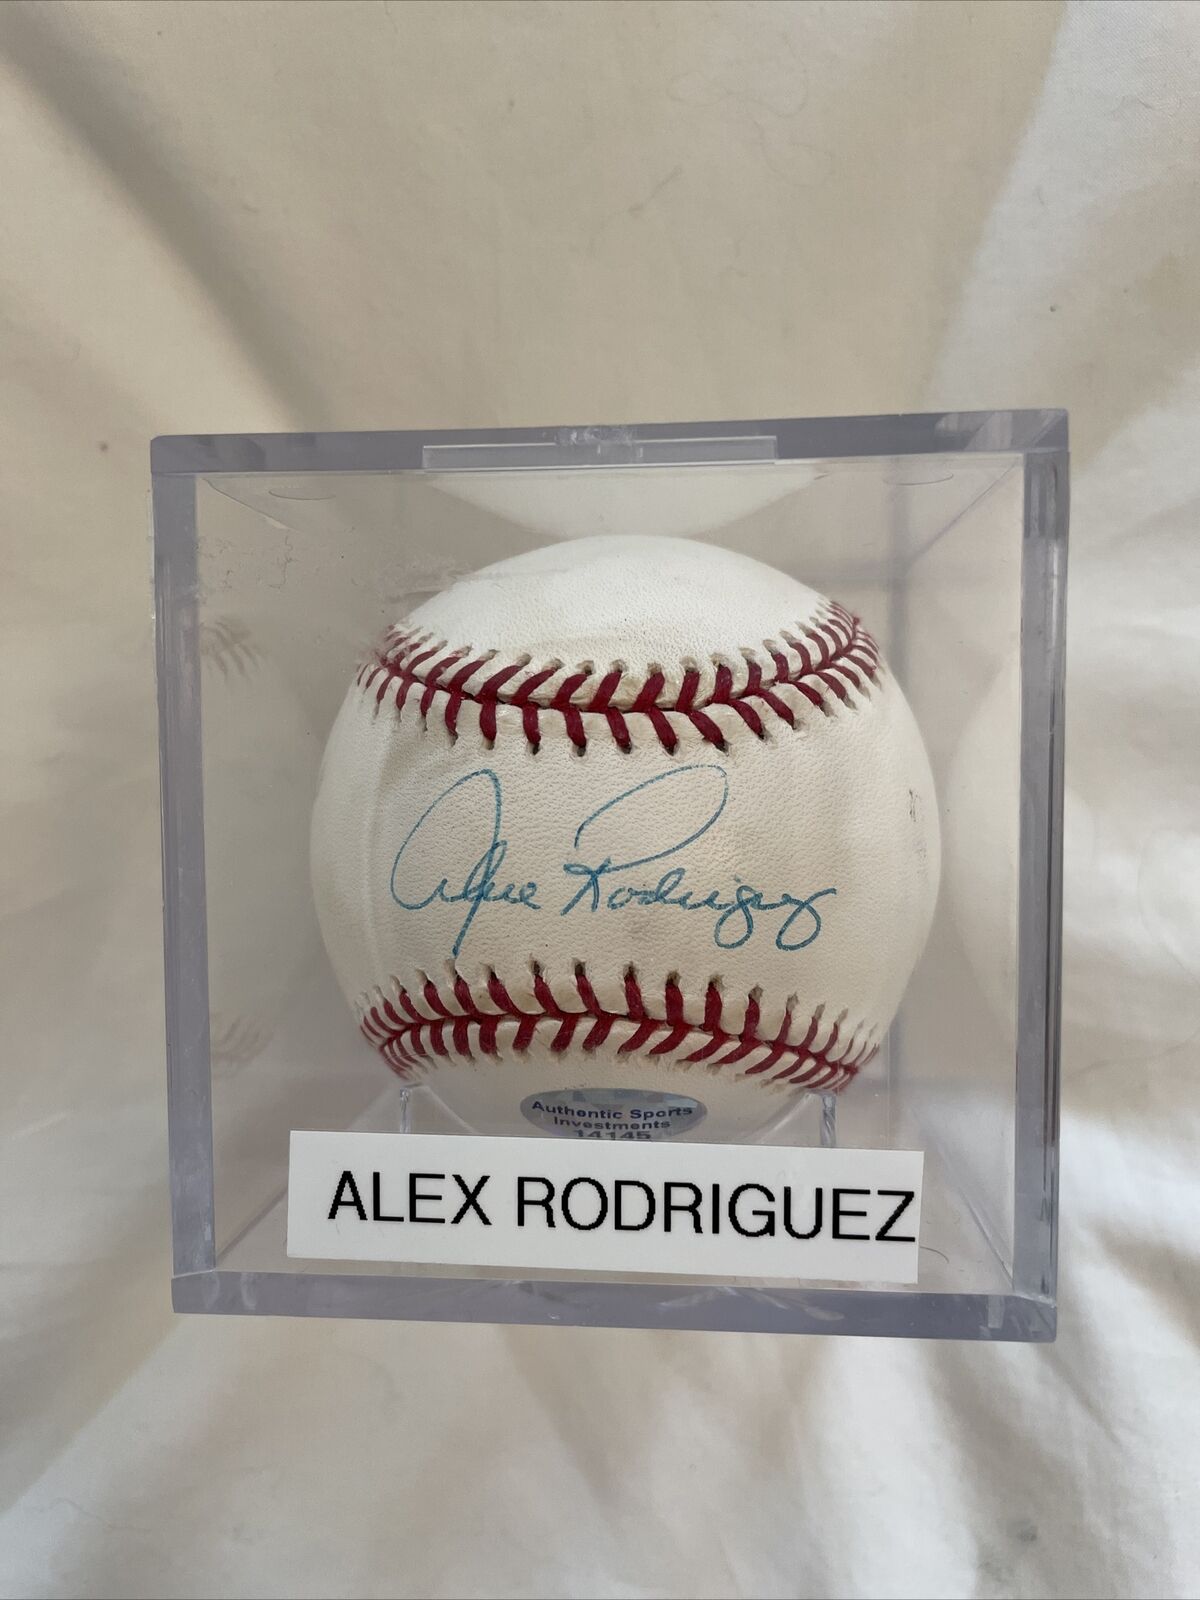 Challenge the lowest price of Japan ☆ overseas Alex Rodriguez Signed League Major Baseball